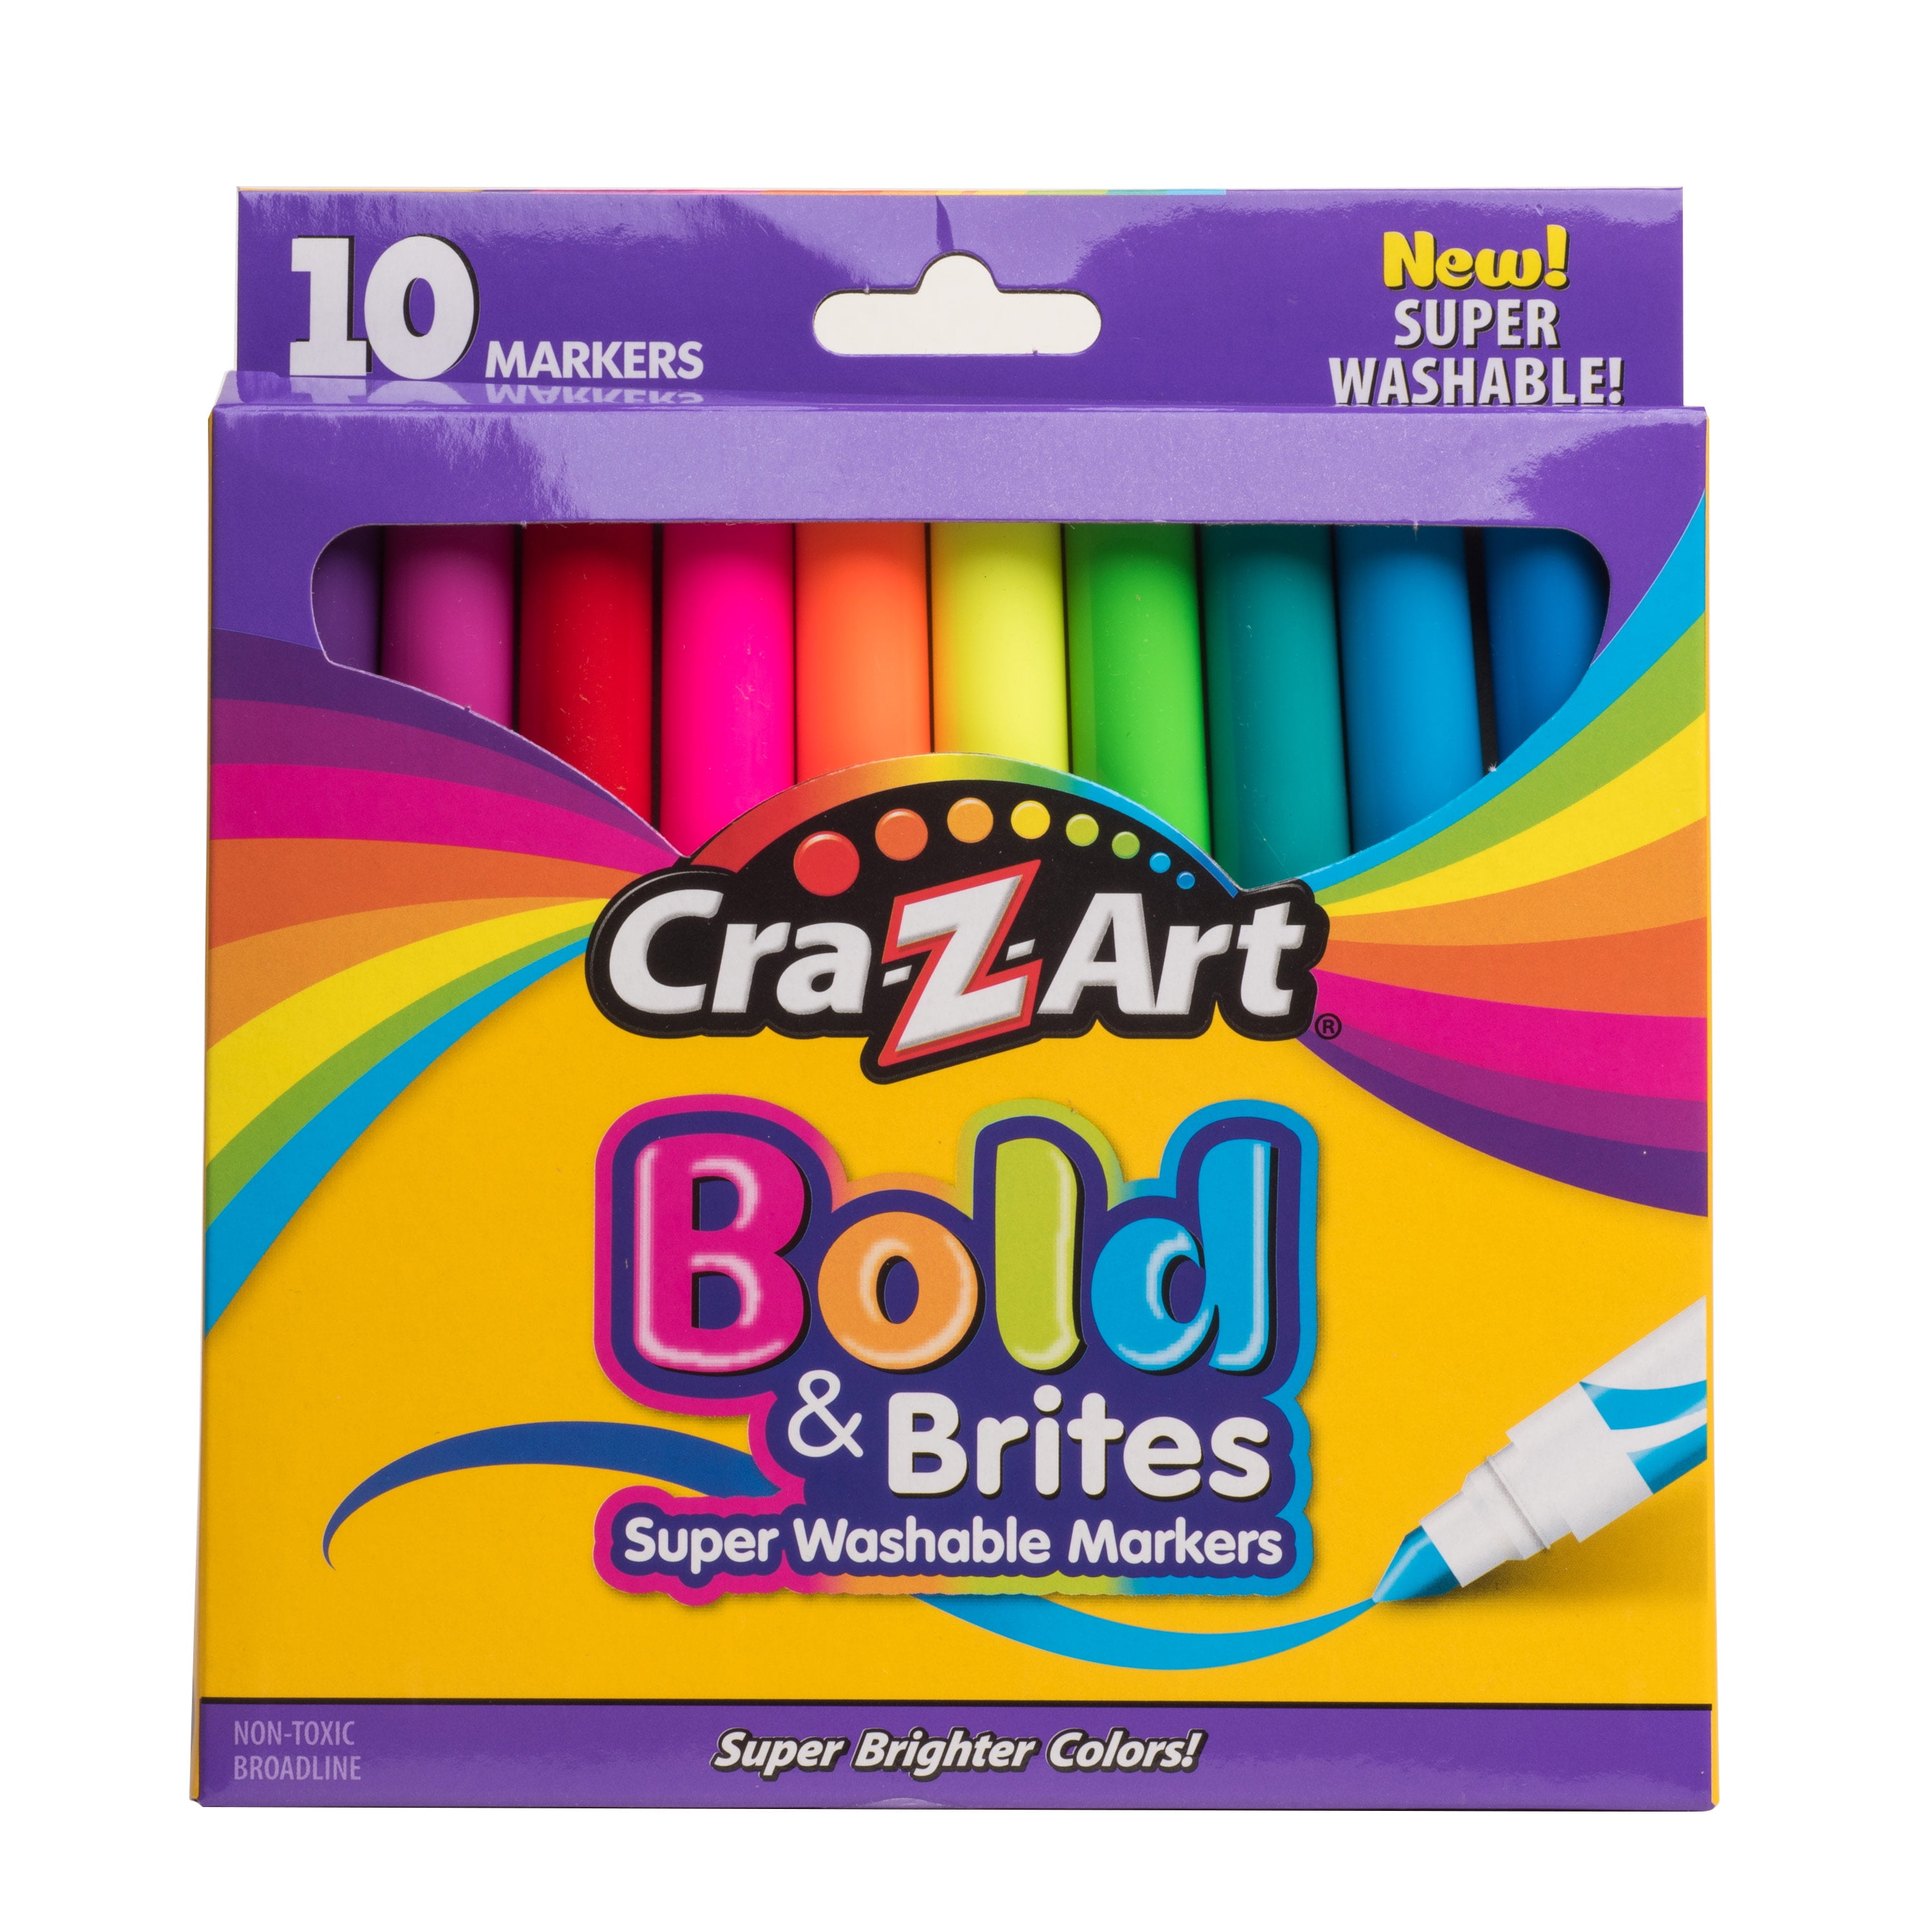 BETTER Than Crayola!? (Cra-Z-Art Markers Review) 